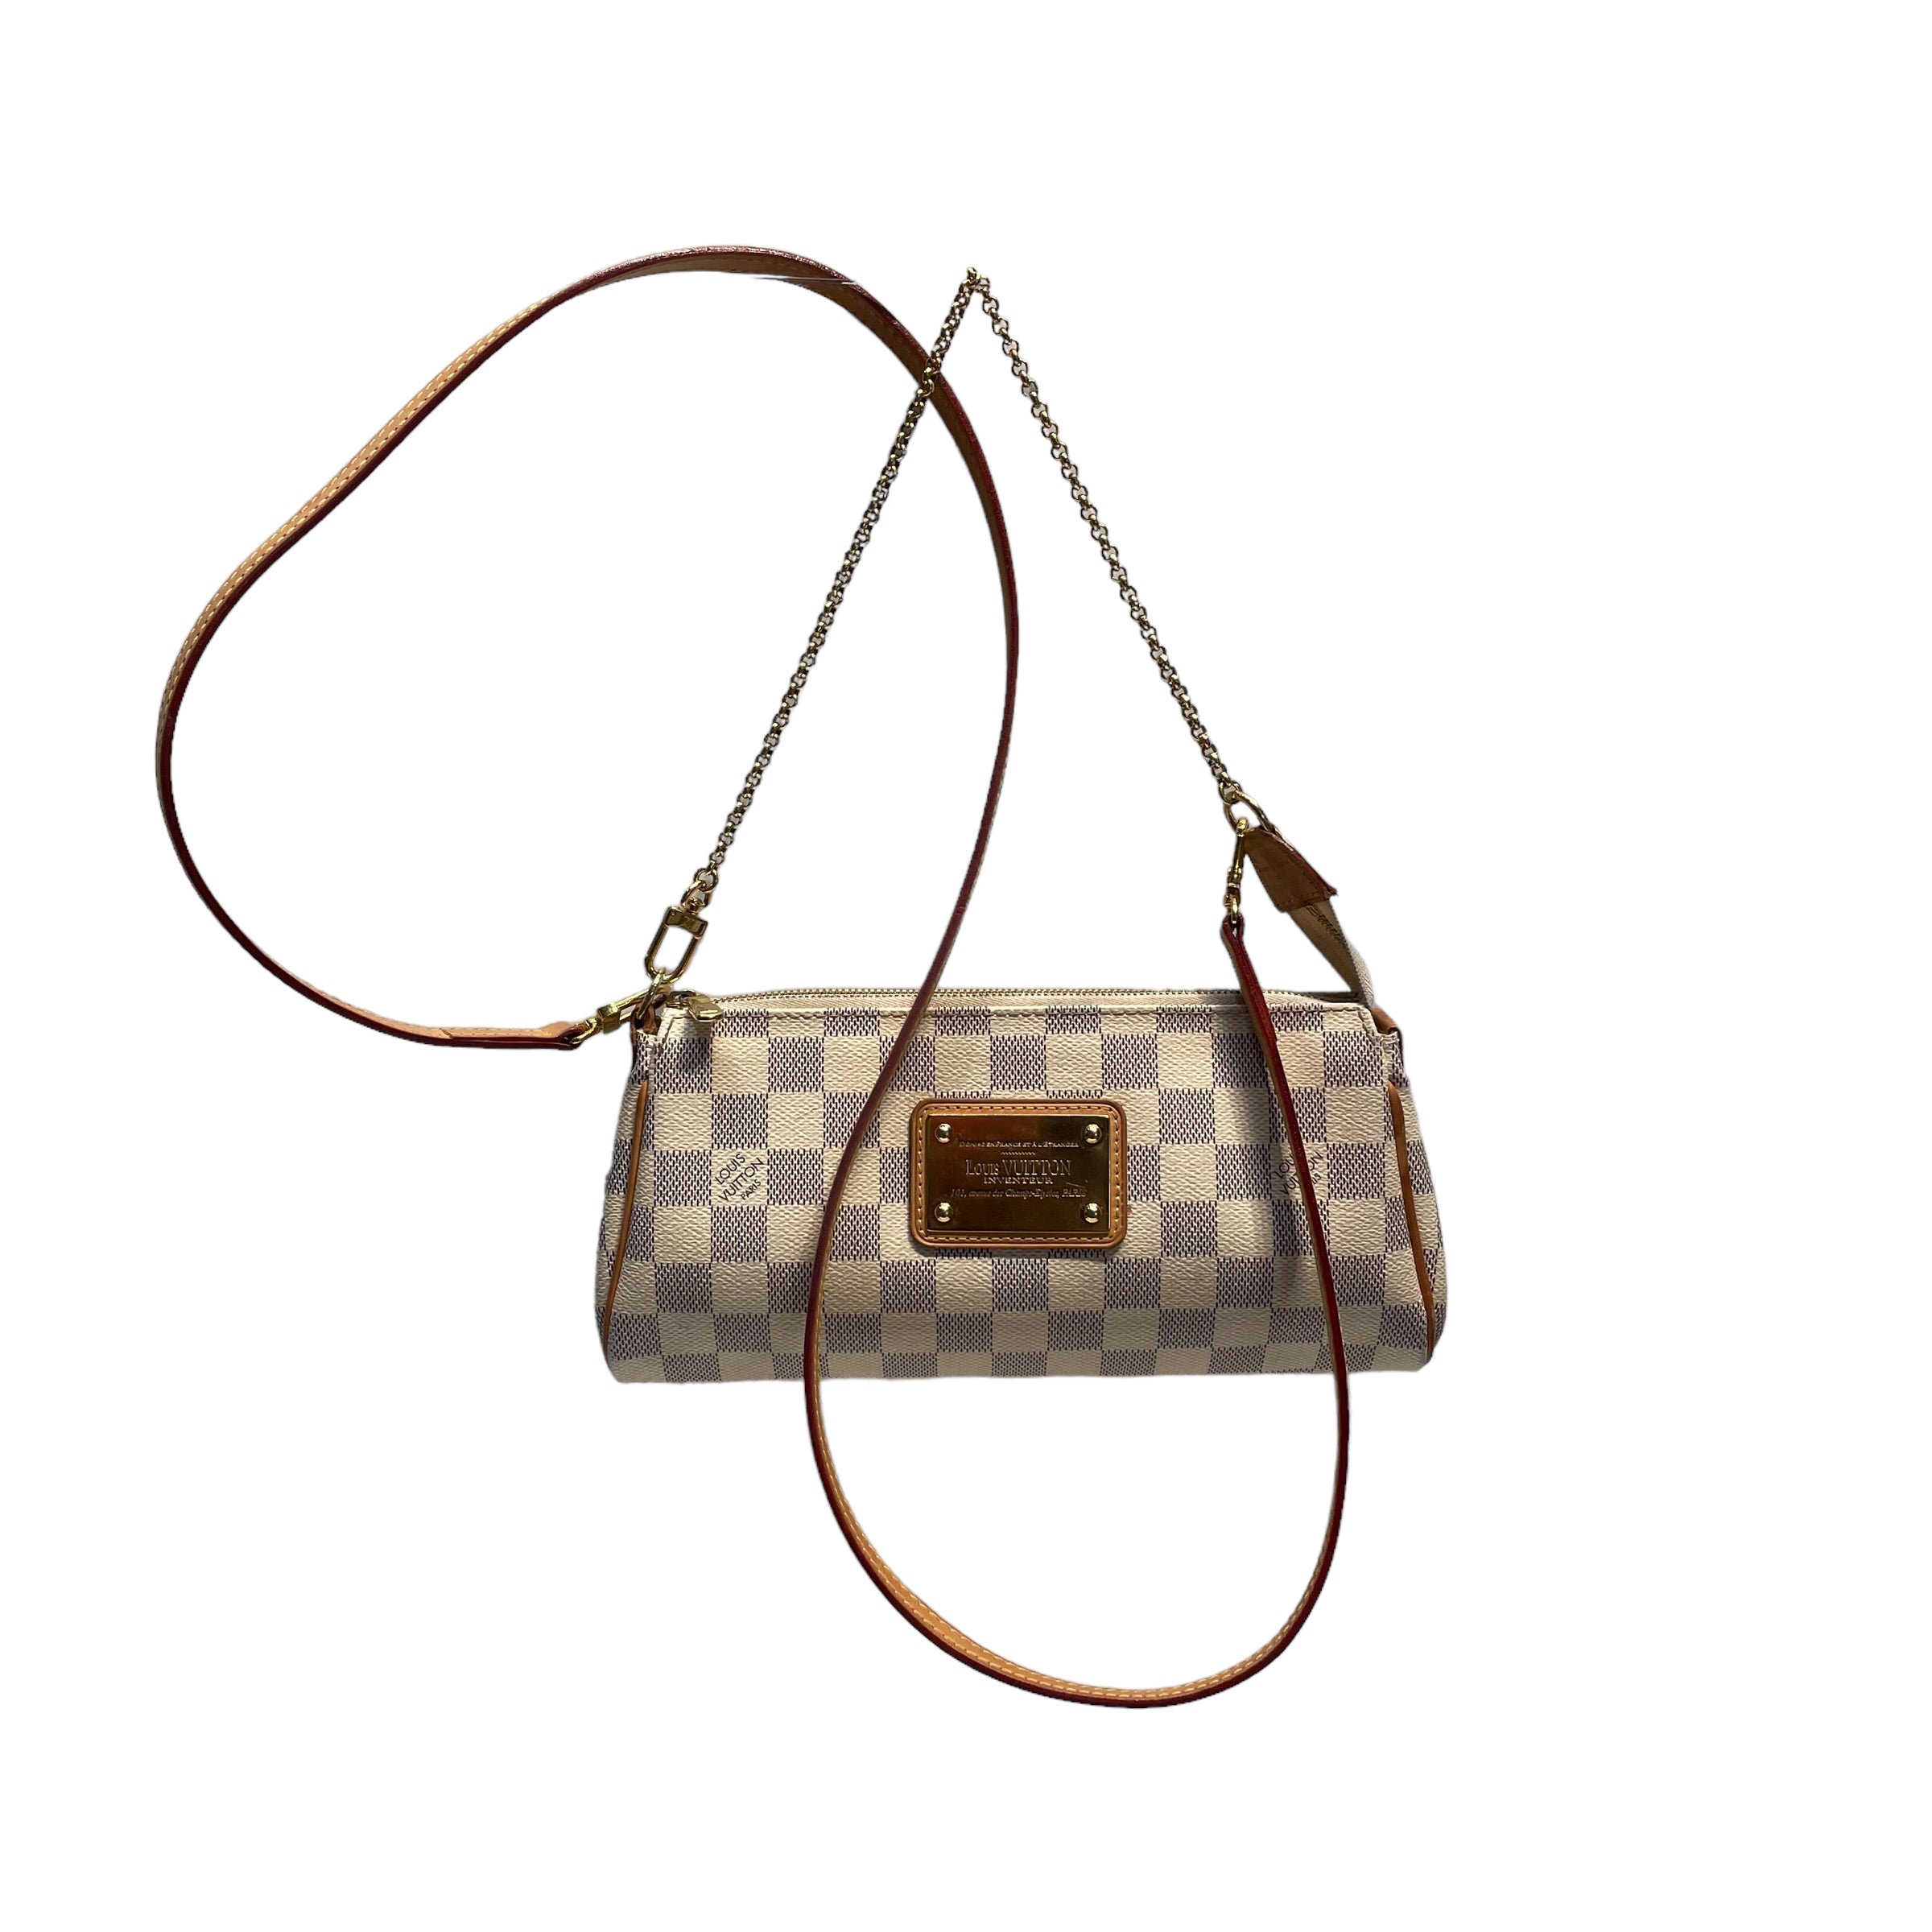 LOUIS VUITTON///Hand Bag/--/Gingham Check/Leather/CRM/W [Designers